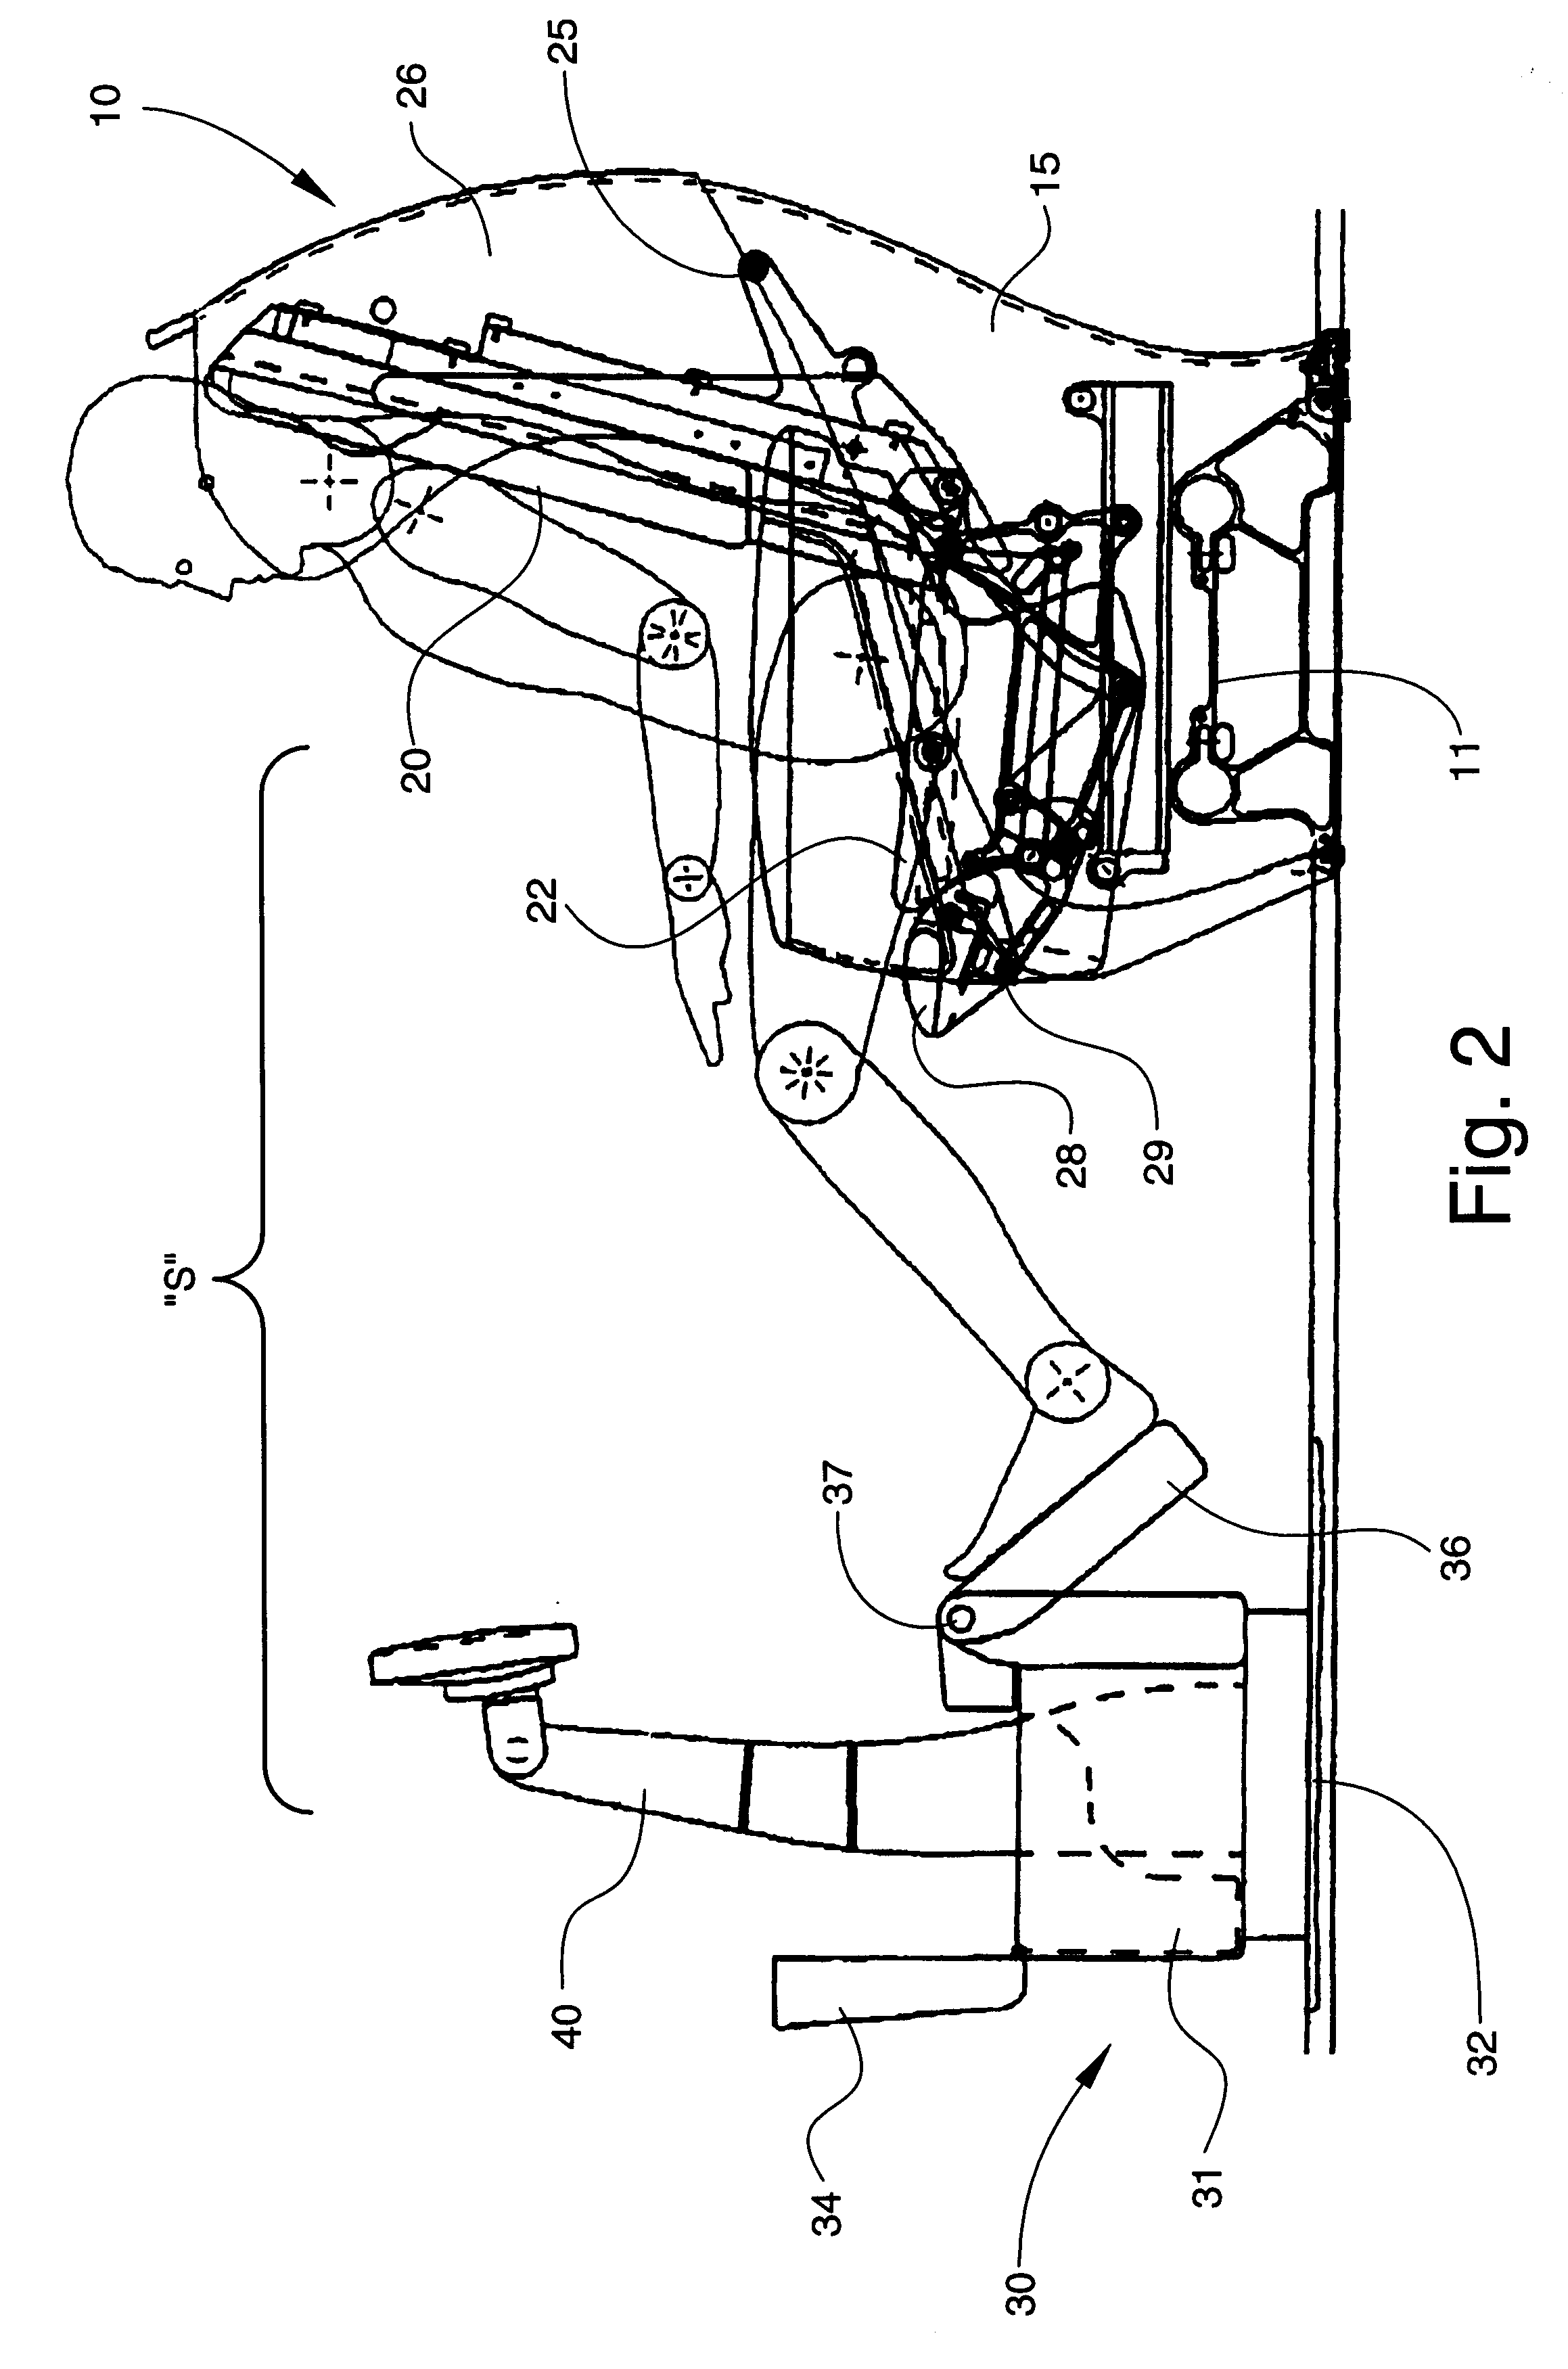 Aircraft cabin seat configuration with enhanced ingress/egress